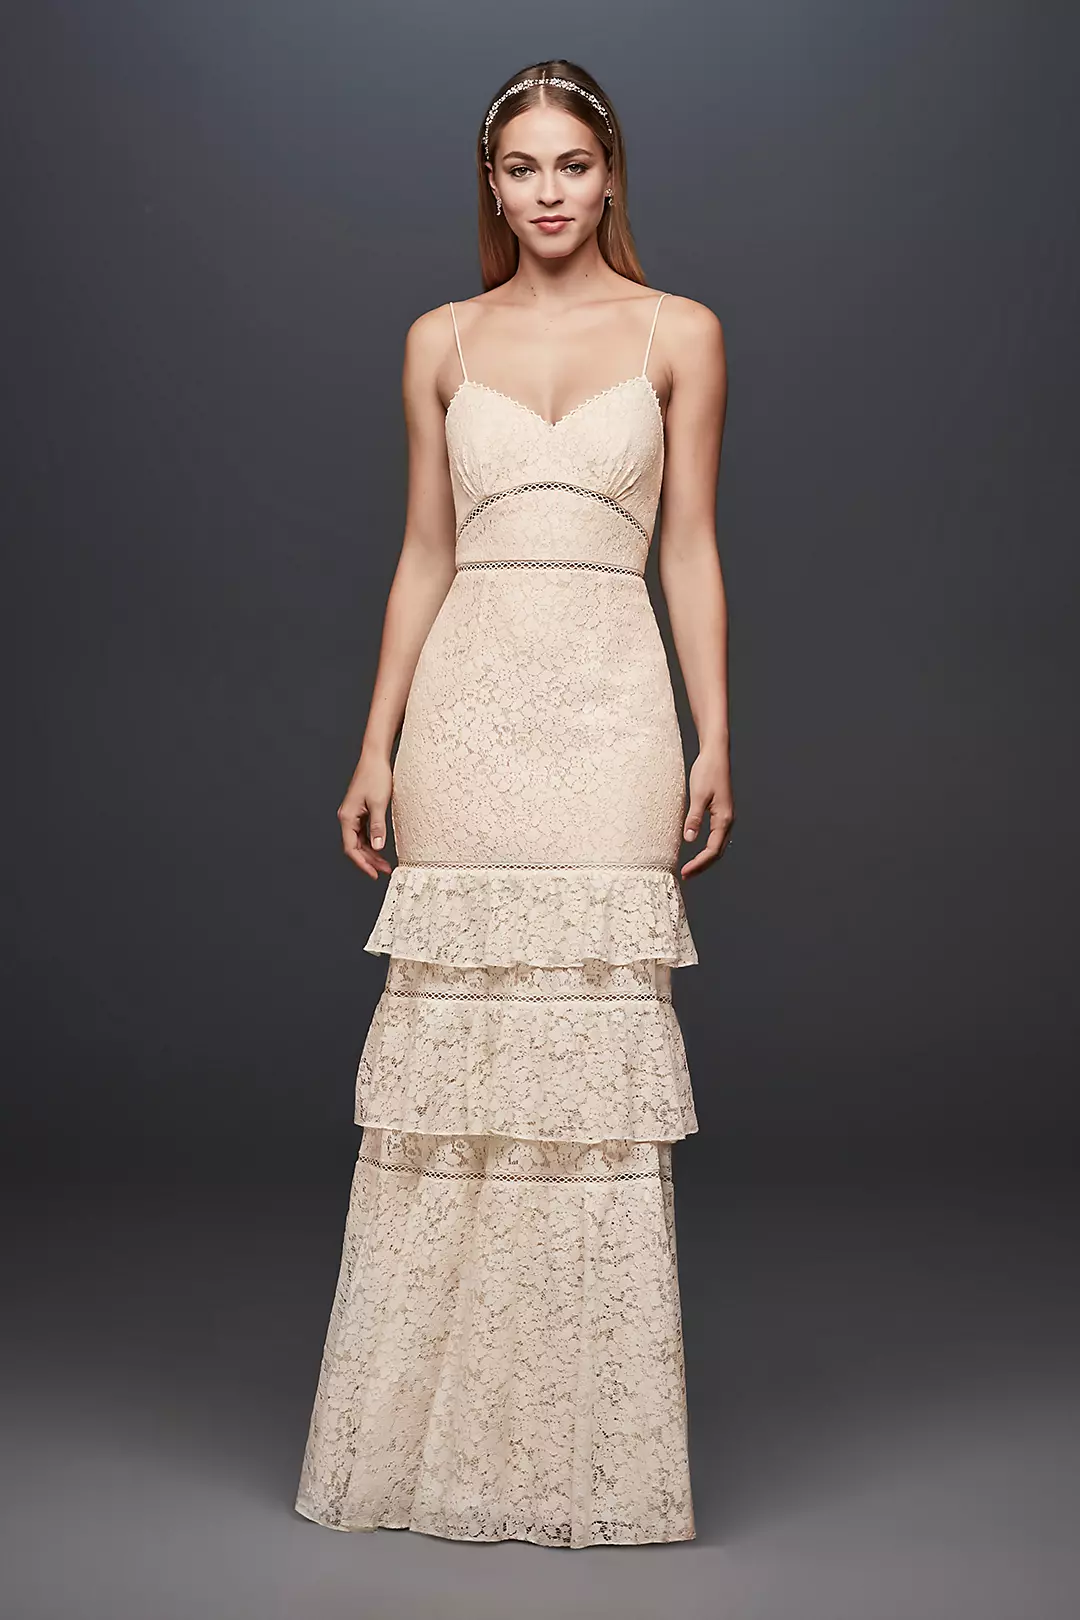 Tiered Lace Sheath Gown with Openwork Insets  Image